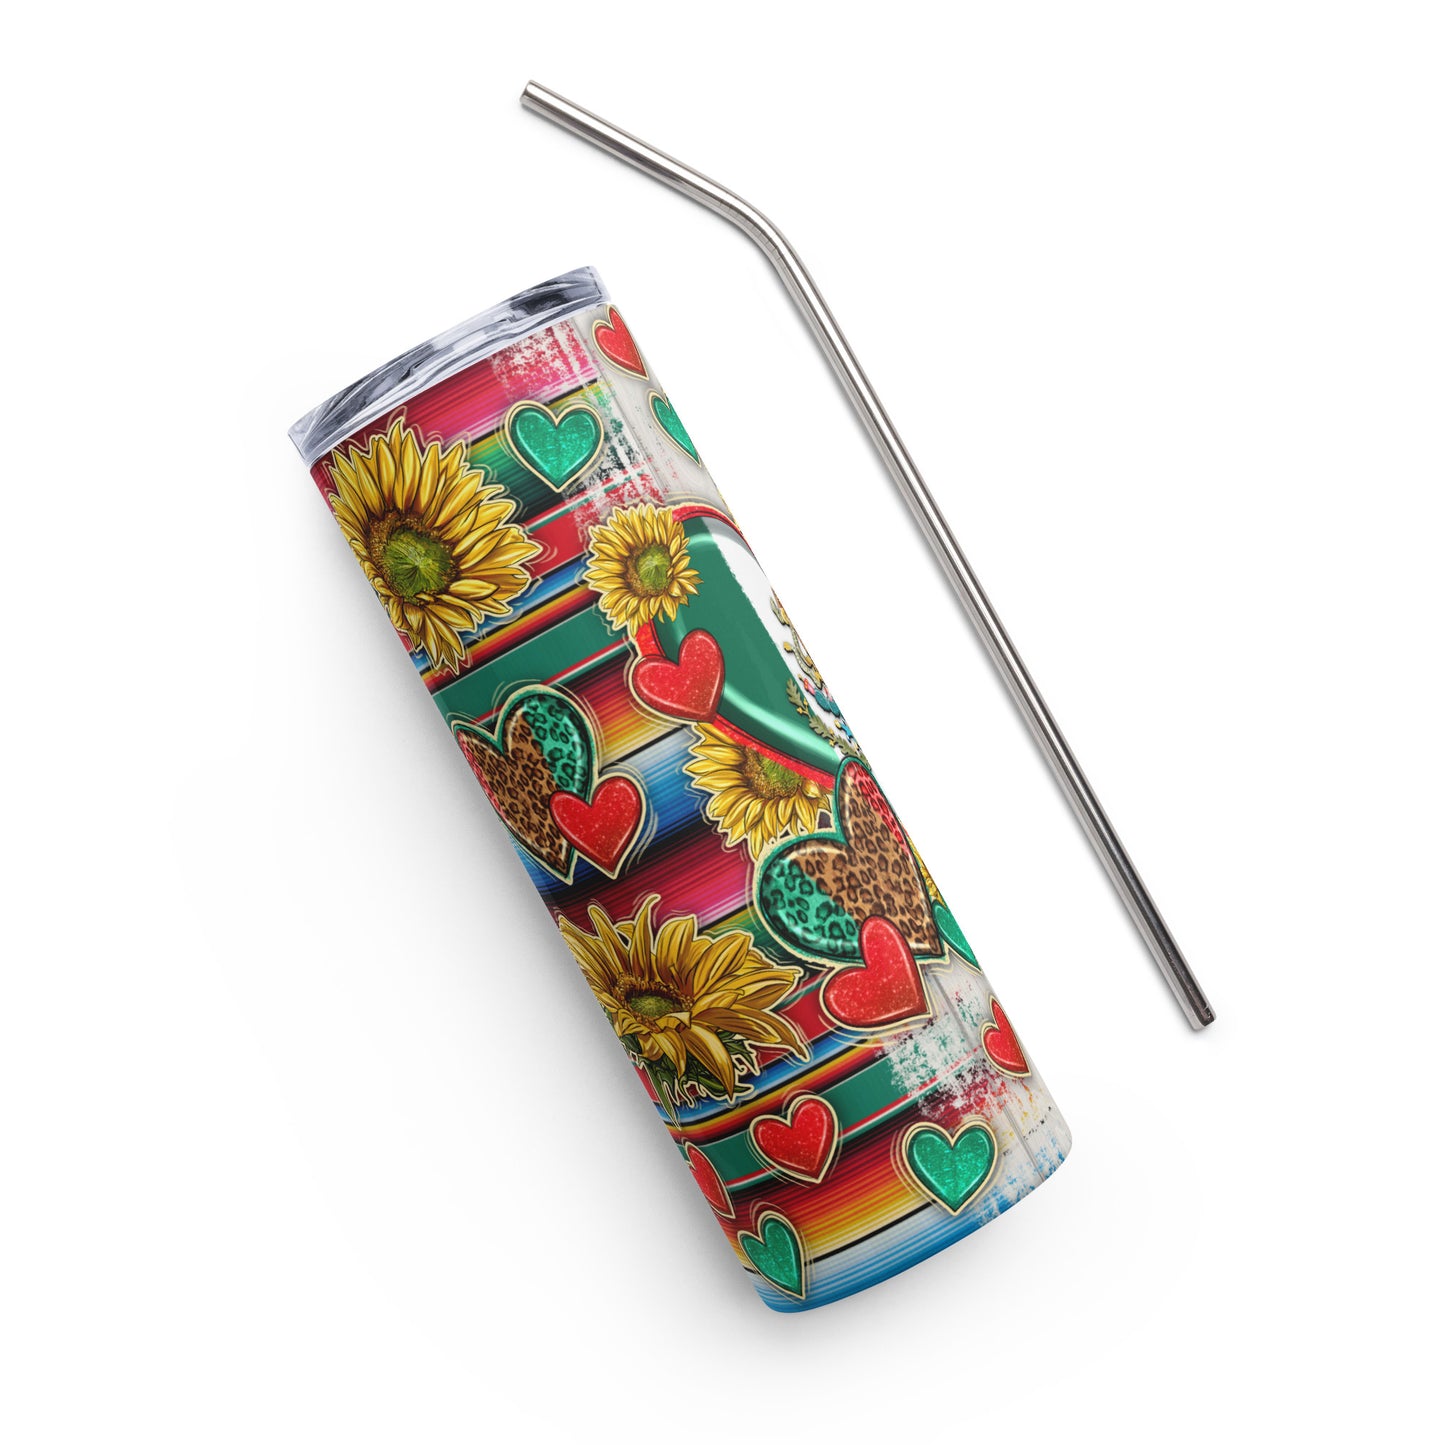 Mexico in My Heart Stainless steel tumbler